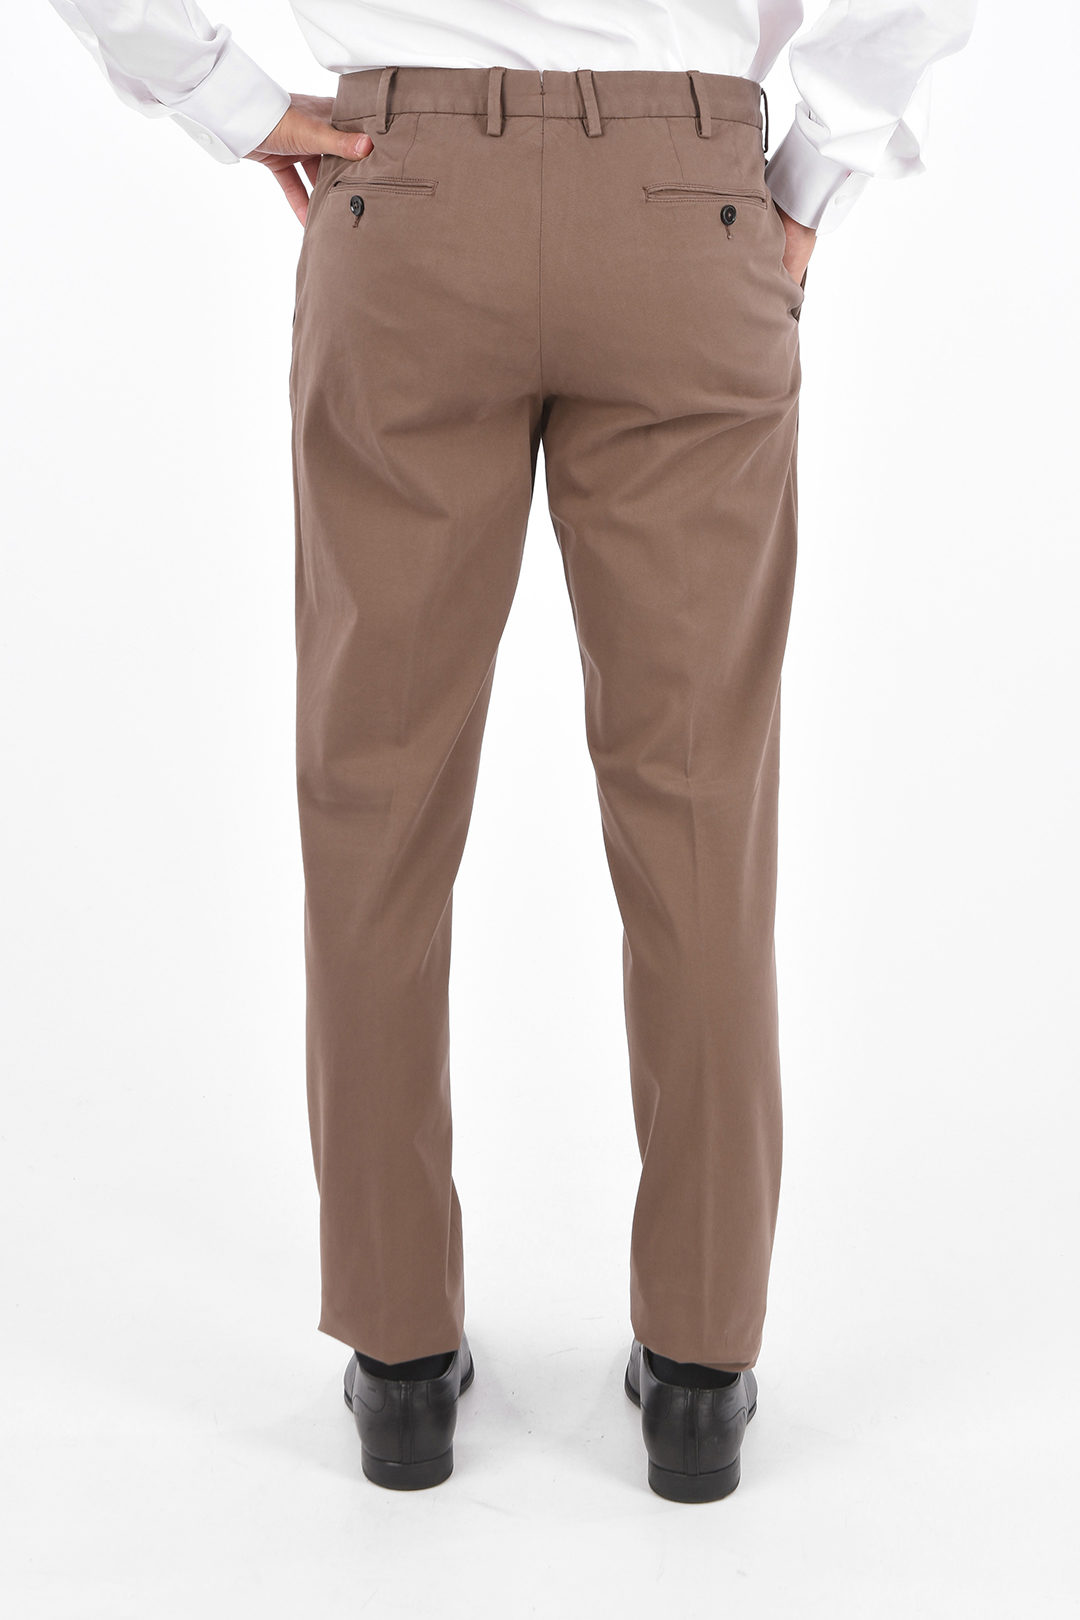 Buy Regular Trouser Pants Beige Beige and Brown Combo of 3 Cotton for Best  Price, Reviews, Free Shipping